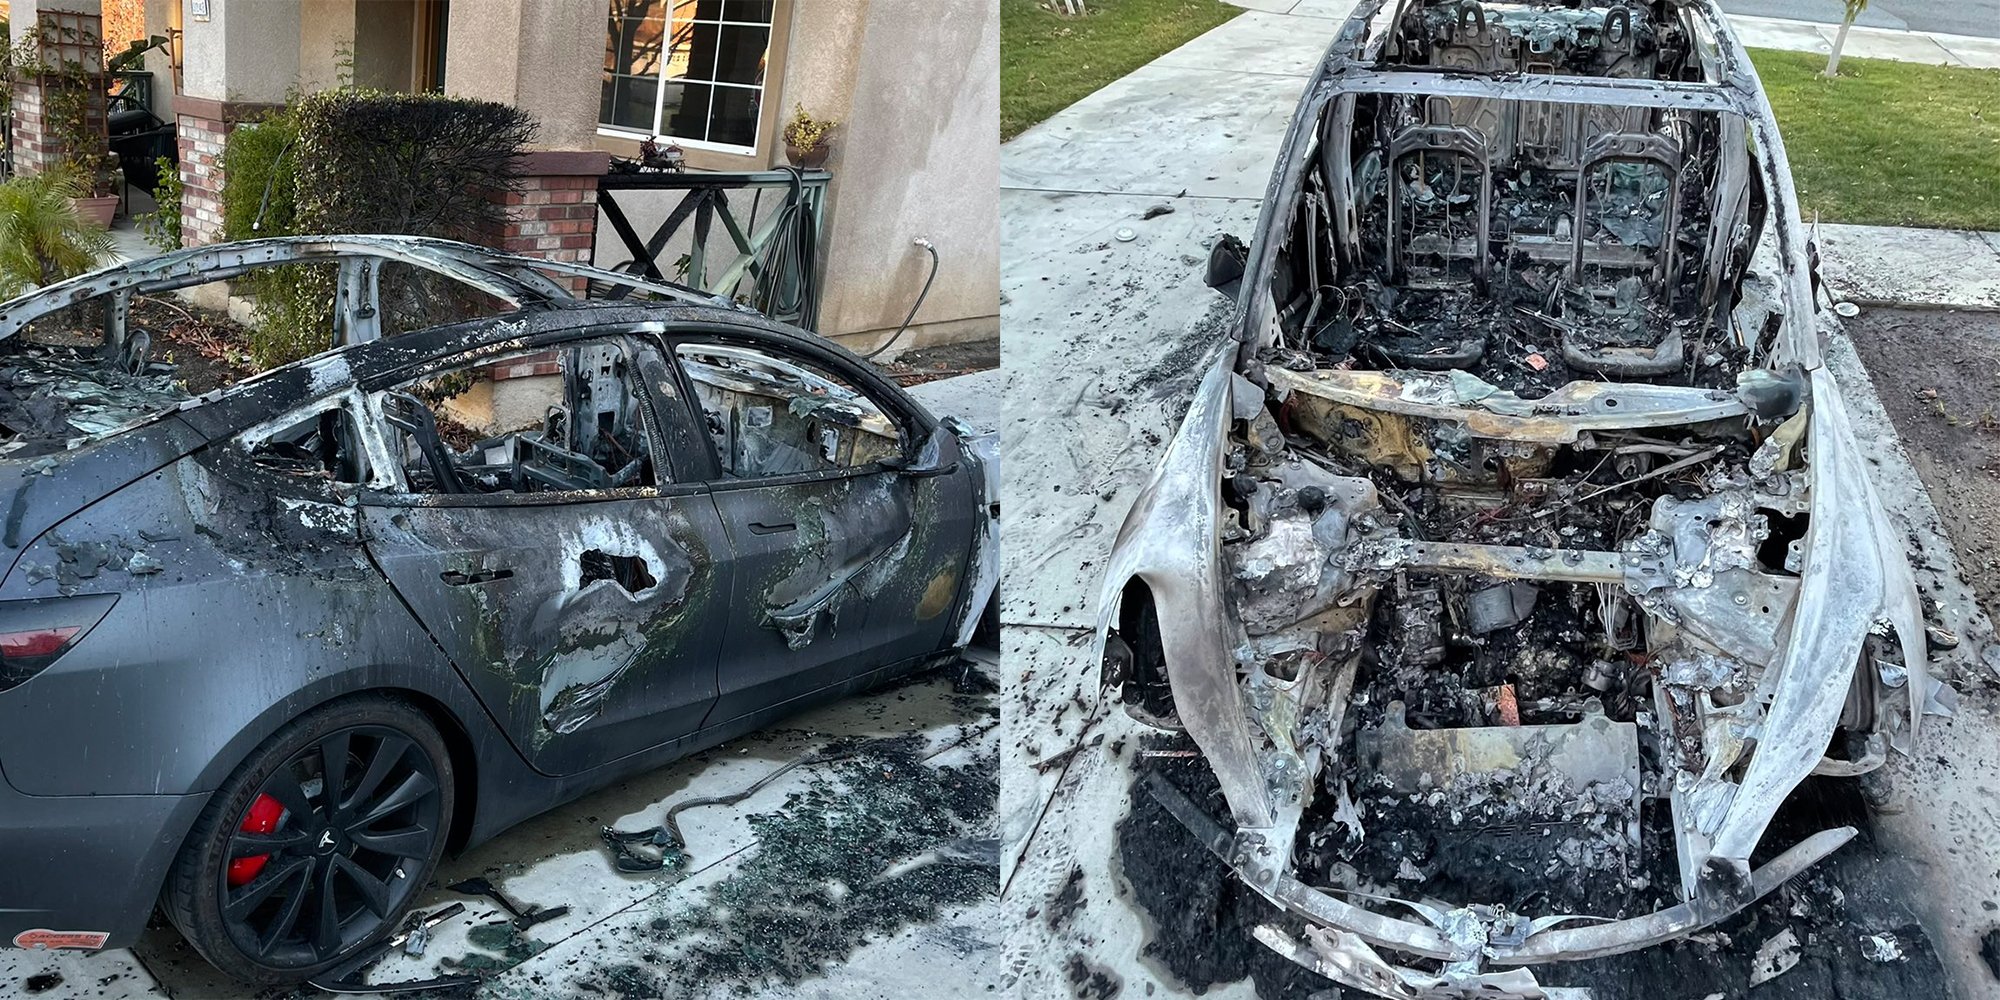 Tesla owner says the company won’t respond to his complaint about his car catching on fire